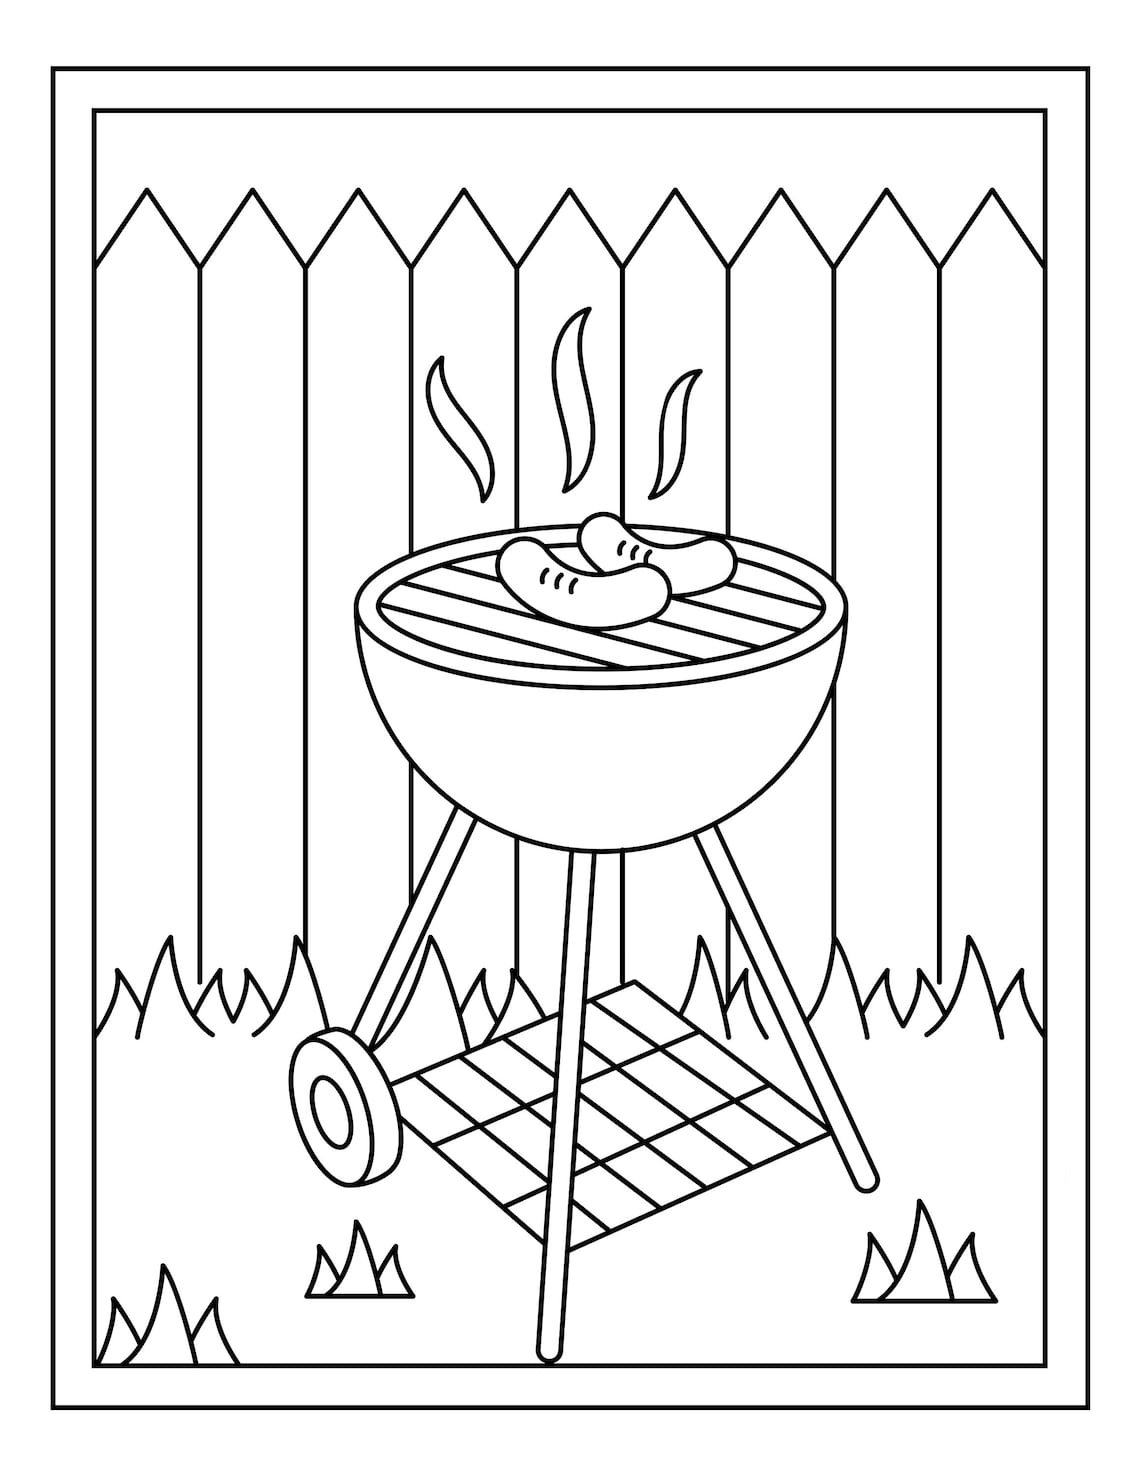 barbeque-printable-coloring-pages-16-pages-etsy-france